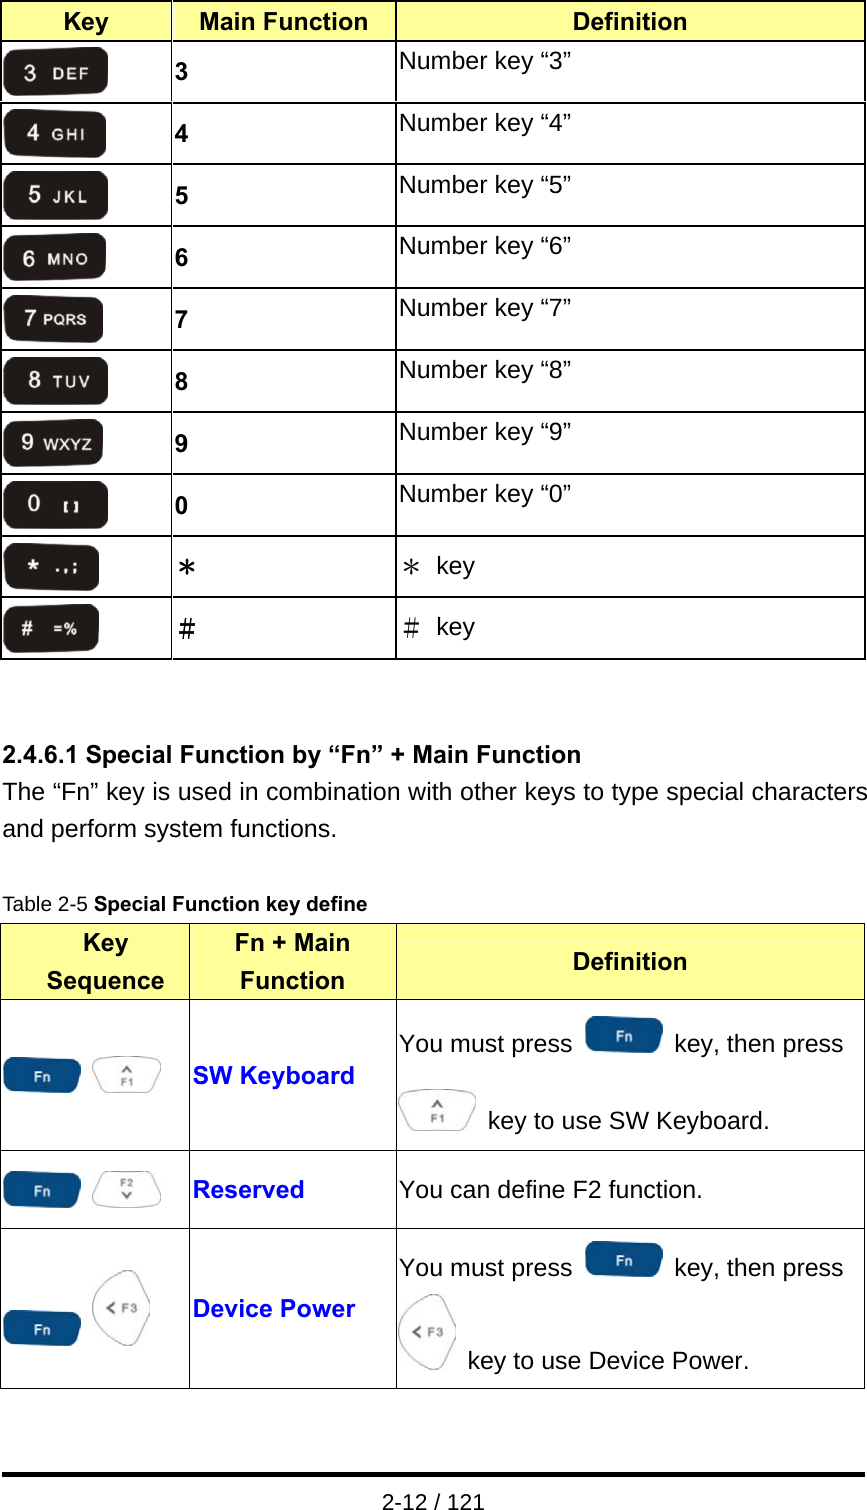  2-12 / 121 Key  Main Function  Definition  3  Number key “3”  4  Number key “4”  5  Number key “5”  6  Number key “6”  7  Number key “7”  8  Number key “8”  9  Number key “9”  0  Number key “0”  ＊ ＊ key  ＃ ＃ key   2.4.6.1 Special Function by “Fn” + Main Function The “Fn” key is used in combination with other keys to type special characters and perform system functions.  Table 2-5 Special Function key define Key Sequence Fn + Main Function  Definition   SW Keyboard You must press   key, then press   key to use SW Keyboard.   Reserved  You can define F2 function.   Device Power You must press   key, then press   key to use Device Power. 